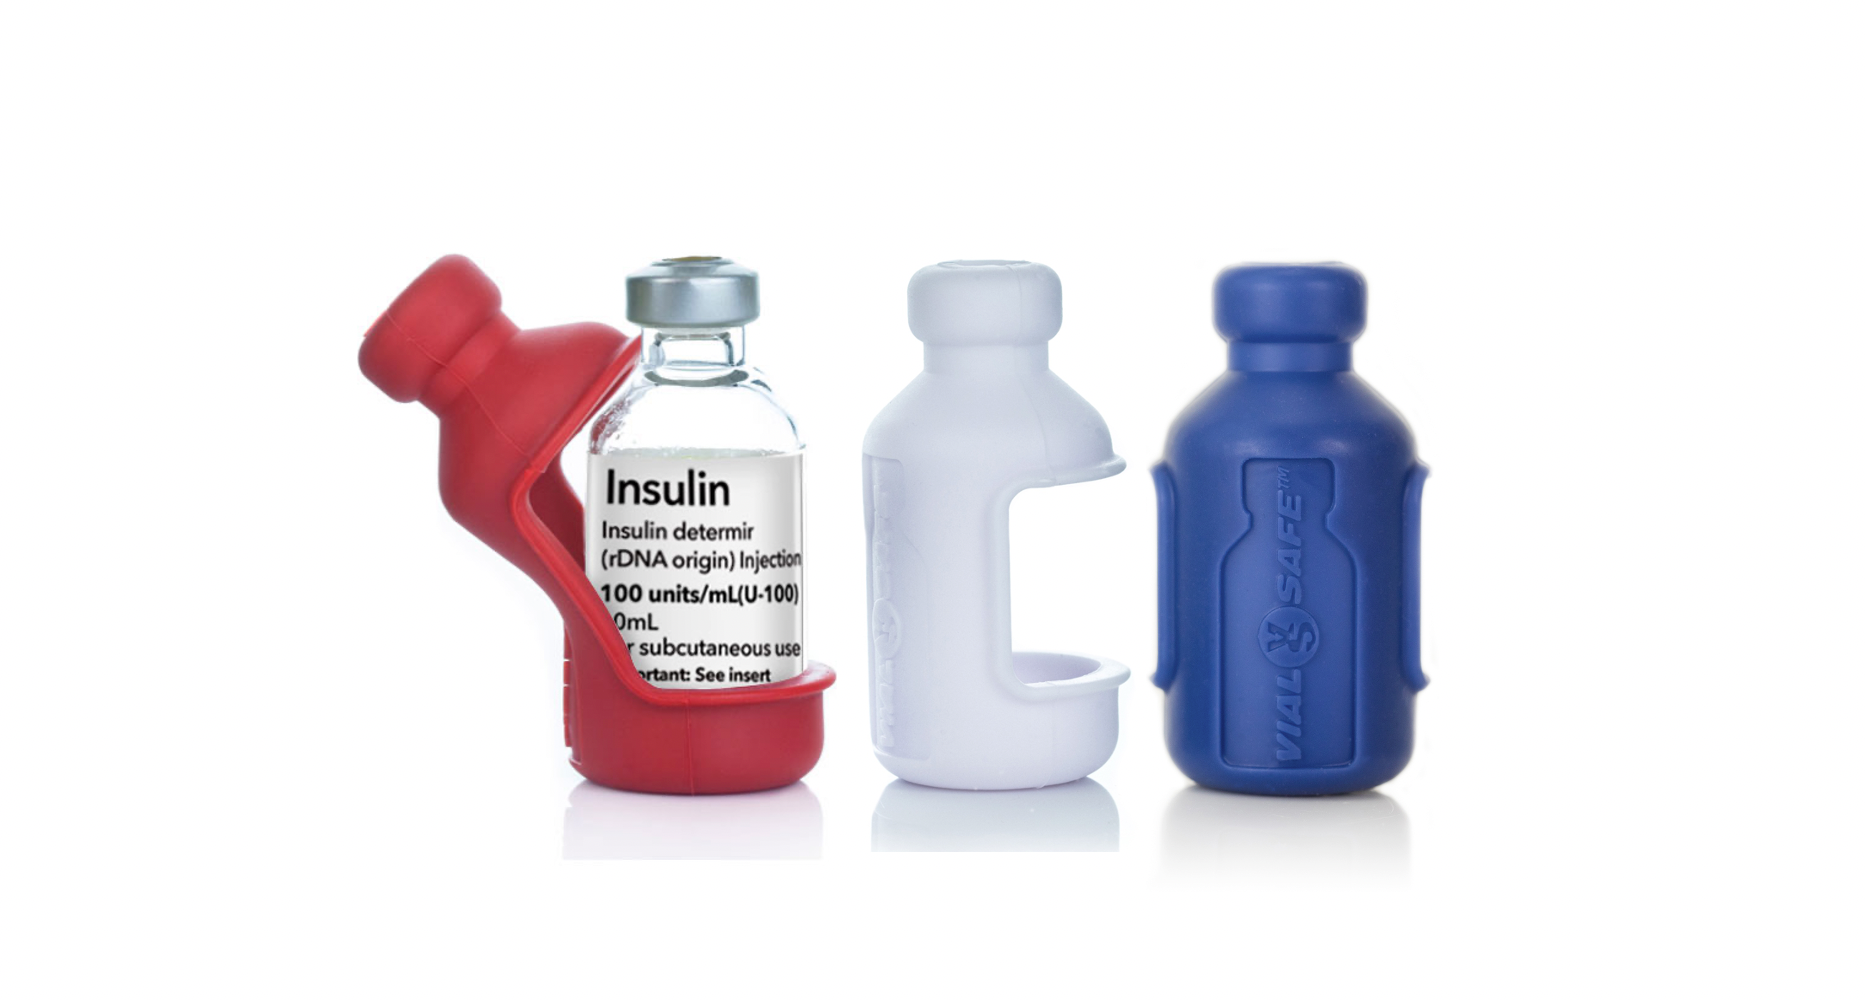 Vial Protector, Vial Safe, Diabetes Case, Vial Case, Bottle Protector, Diabetes Accessories, Diabetes Accessory, Insulin Pump, Bottle Sleeve, Insulin Case, Insulin Vial, Cat Insulin, Diabetes Cover, Diabetes Travel, Diabetic Supplies, Diabetes Supplies, Insulin Bottle Protector, 4th of July, July 4th, Independence Day, Red, White, Navy Blue